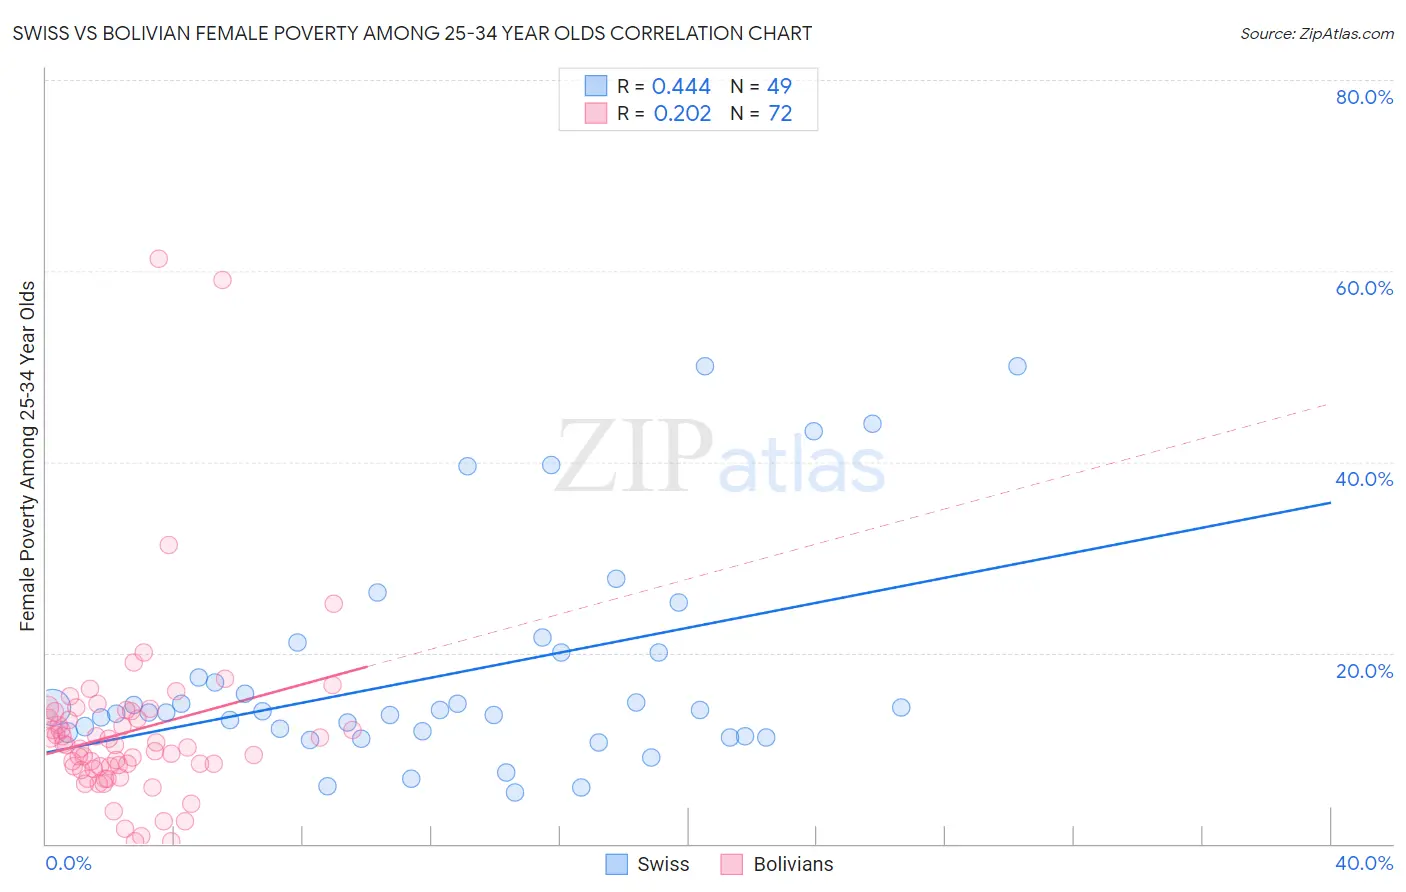 Swiss vs Bolivian Female Poverty Among 25-34 Year Olds